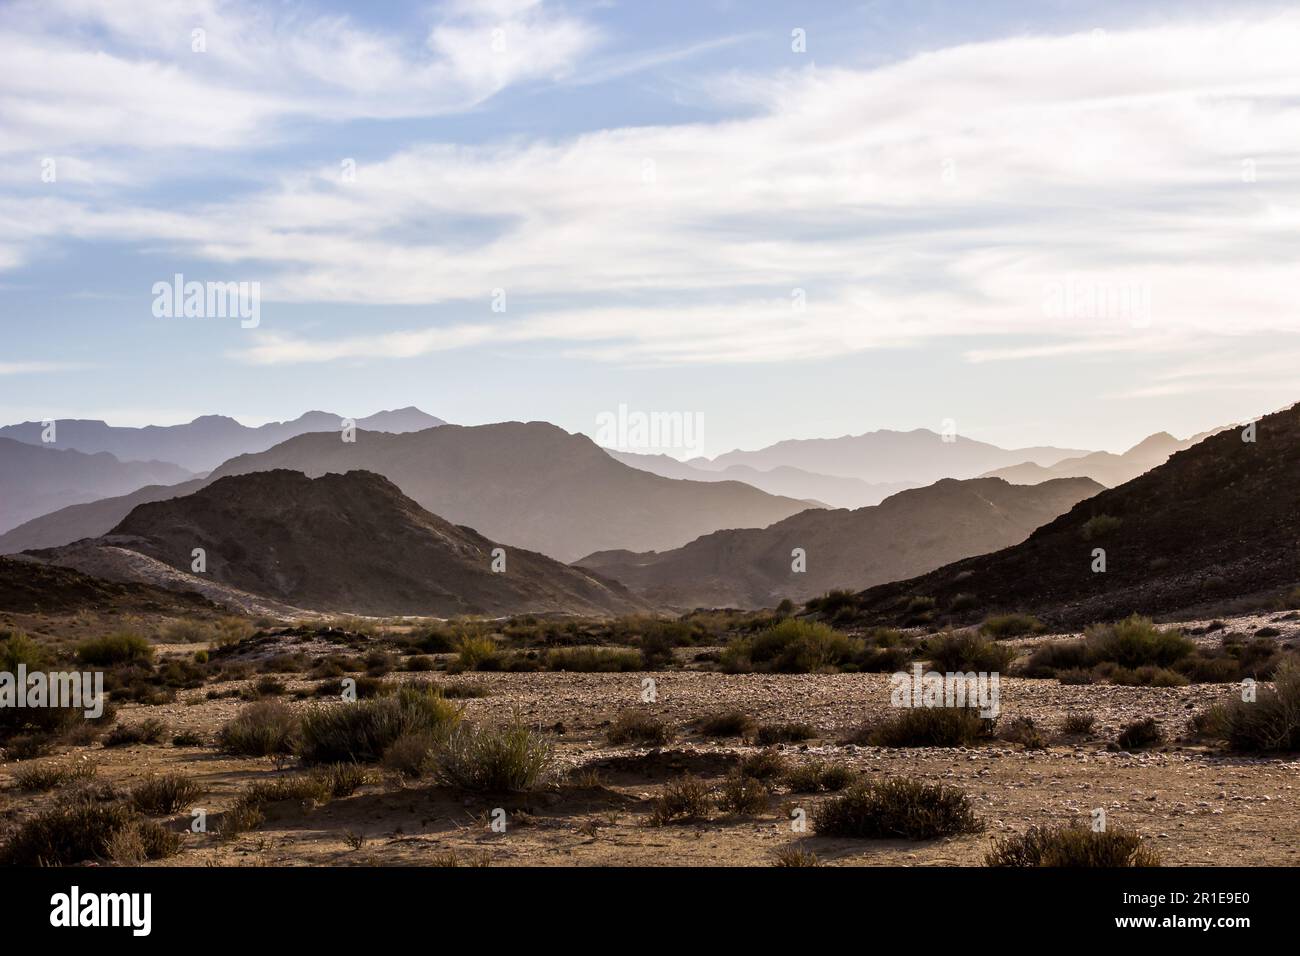 Dreamscape of the barren rocky desert of the Richtersveld, South Africa. Stock Photo